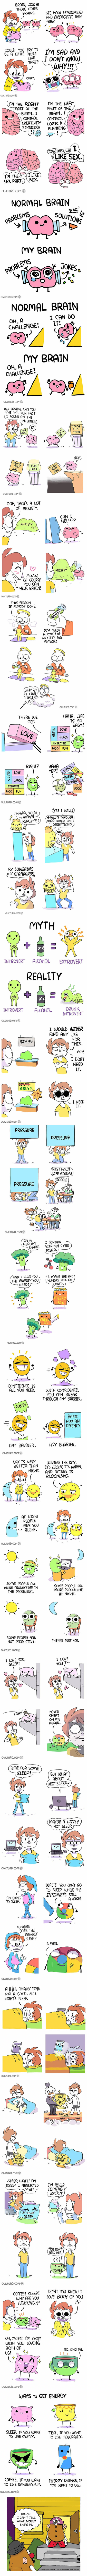 a series of brain related comics